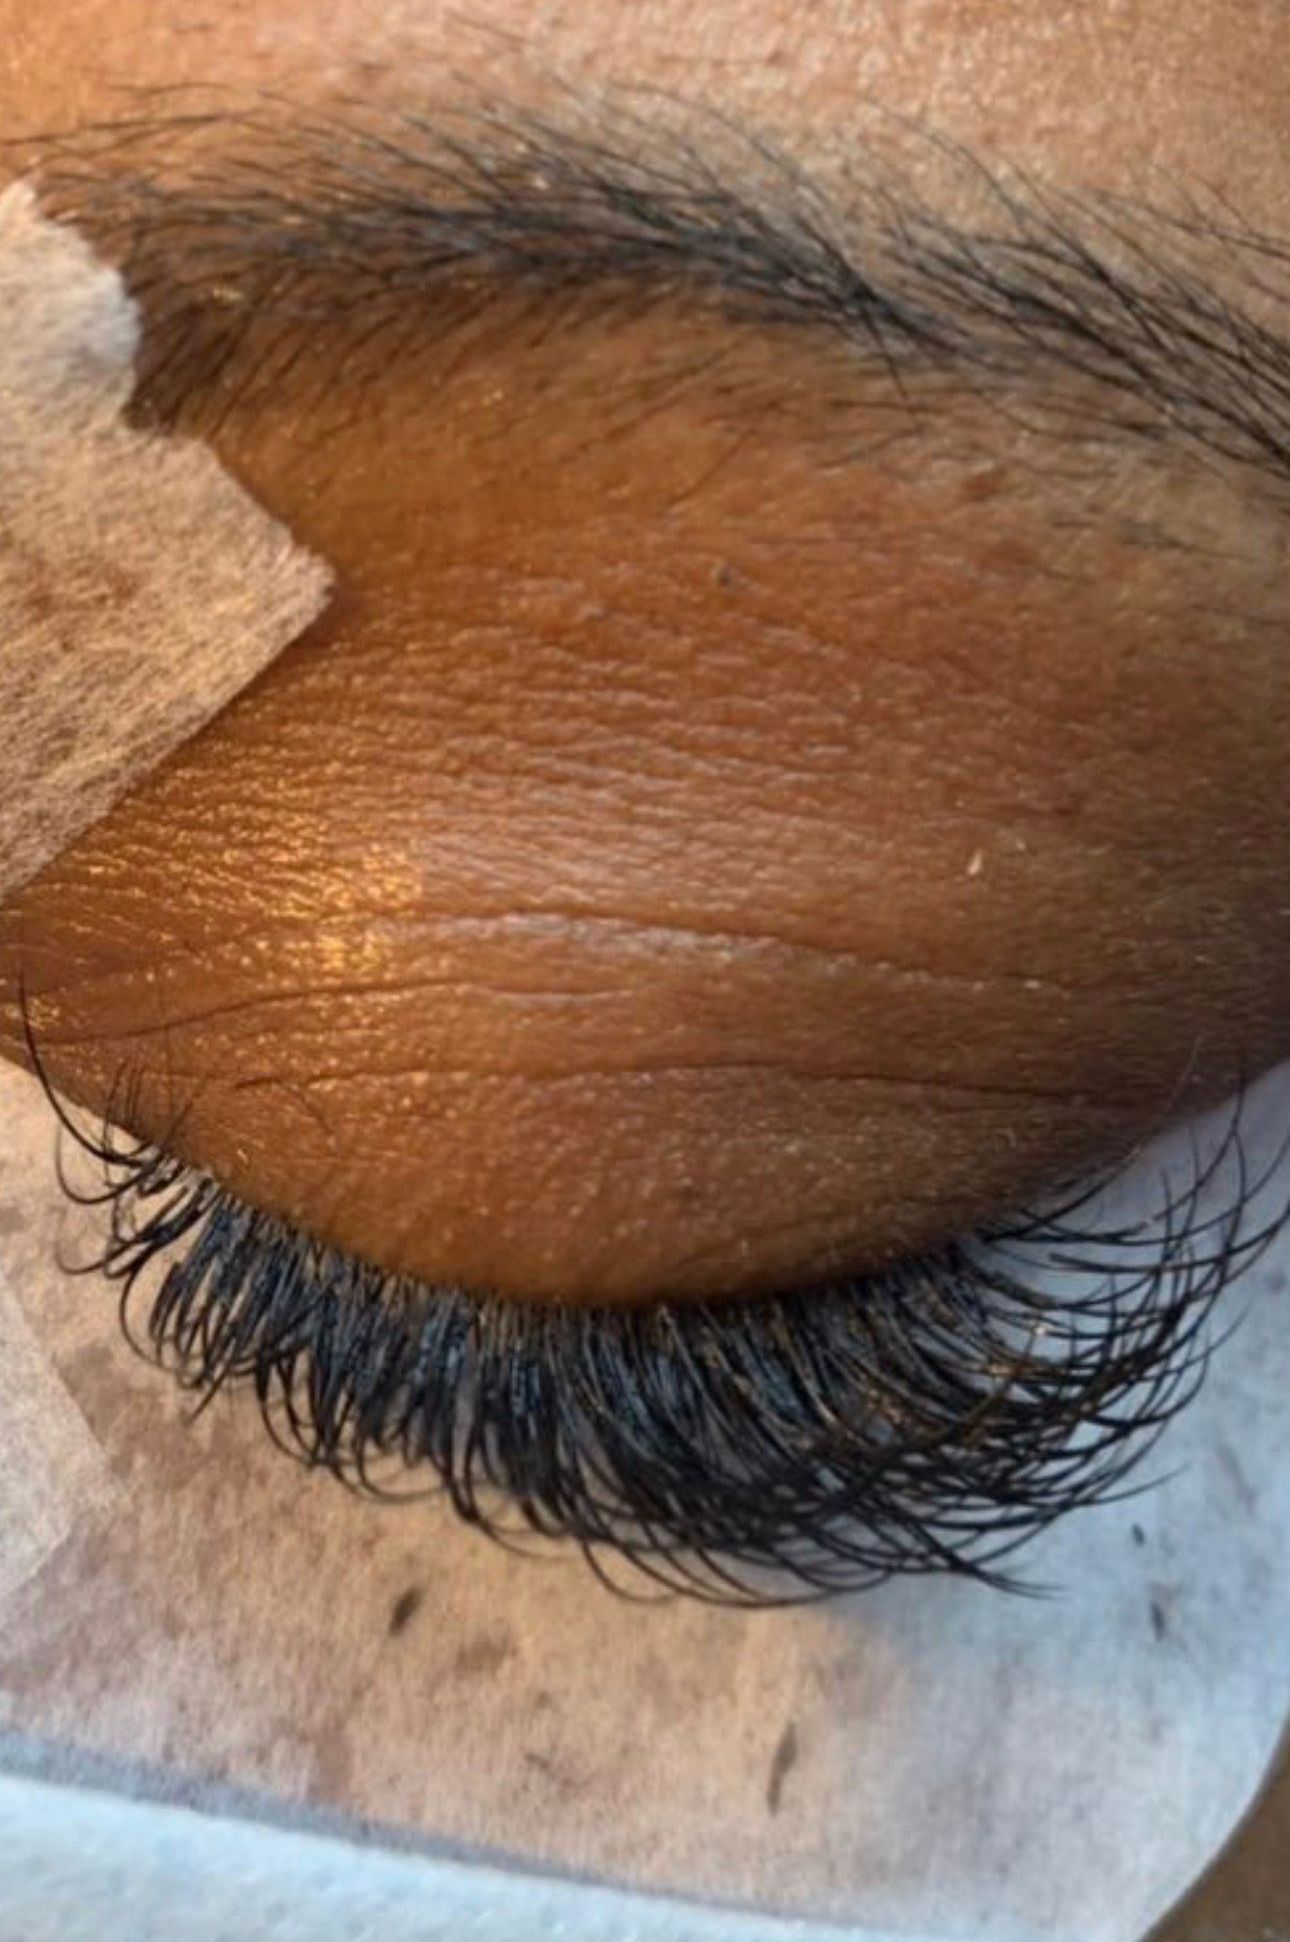 A close up of a woman 's eye with long eyelashes.| St. Louis, MO | Lashing Out Loud